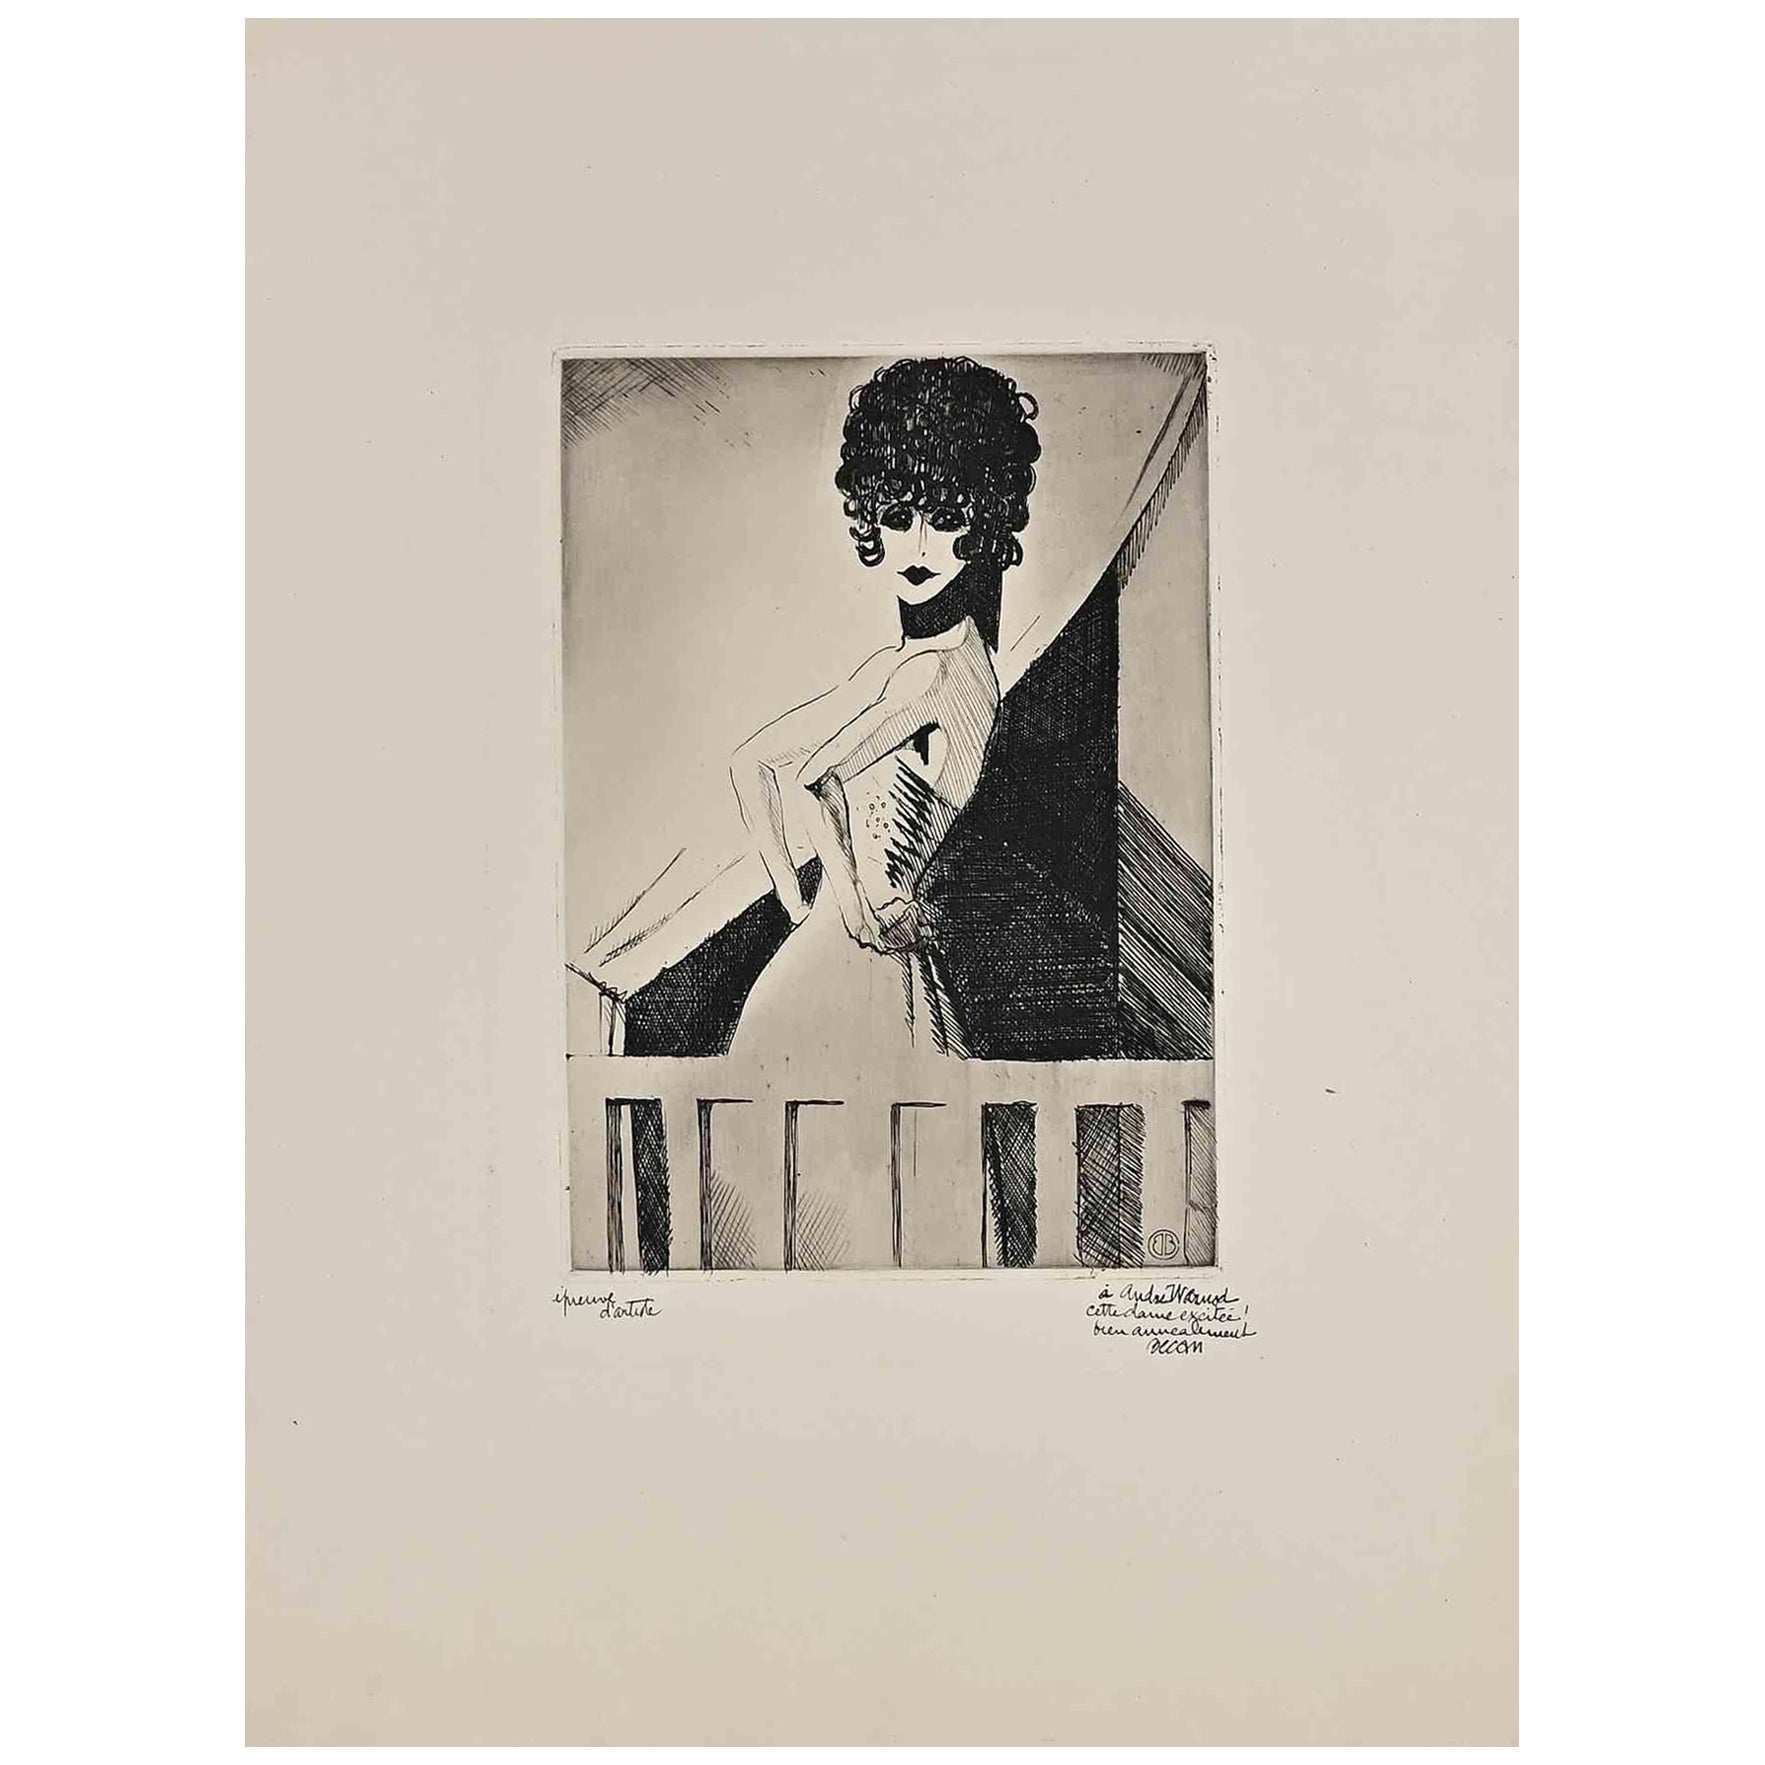 Woman is an etching realized in 1925 by Bernard Bécan (1890-1943).

Hand-signed, monogrammed and dedicated on the right margin. Edition, p.a.  Passpartout included: cm 55.5x37.5

The artwork is depicted skillfully through confident and short strokes